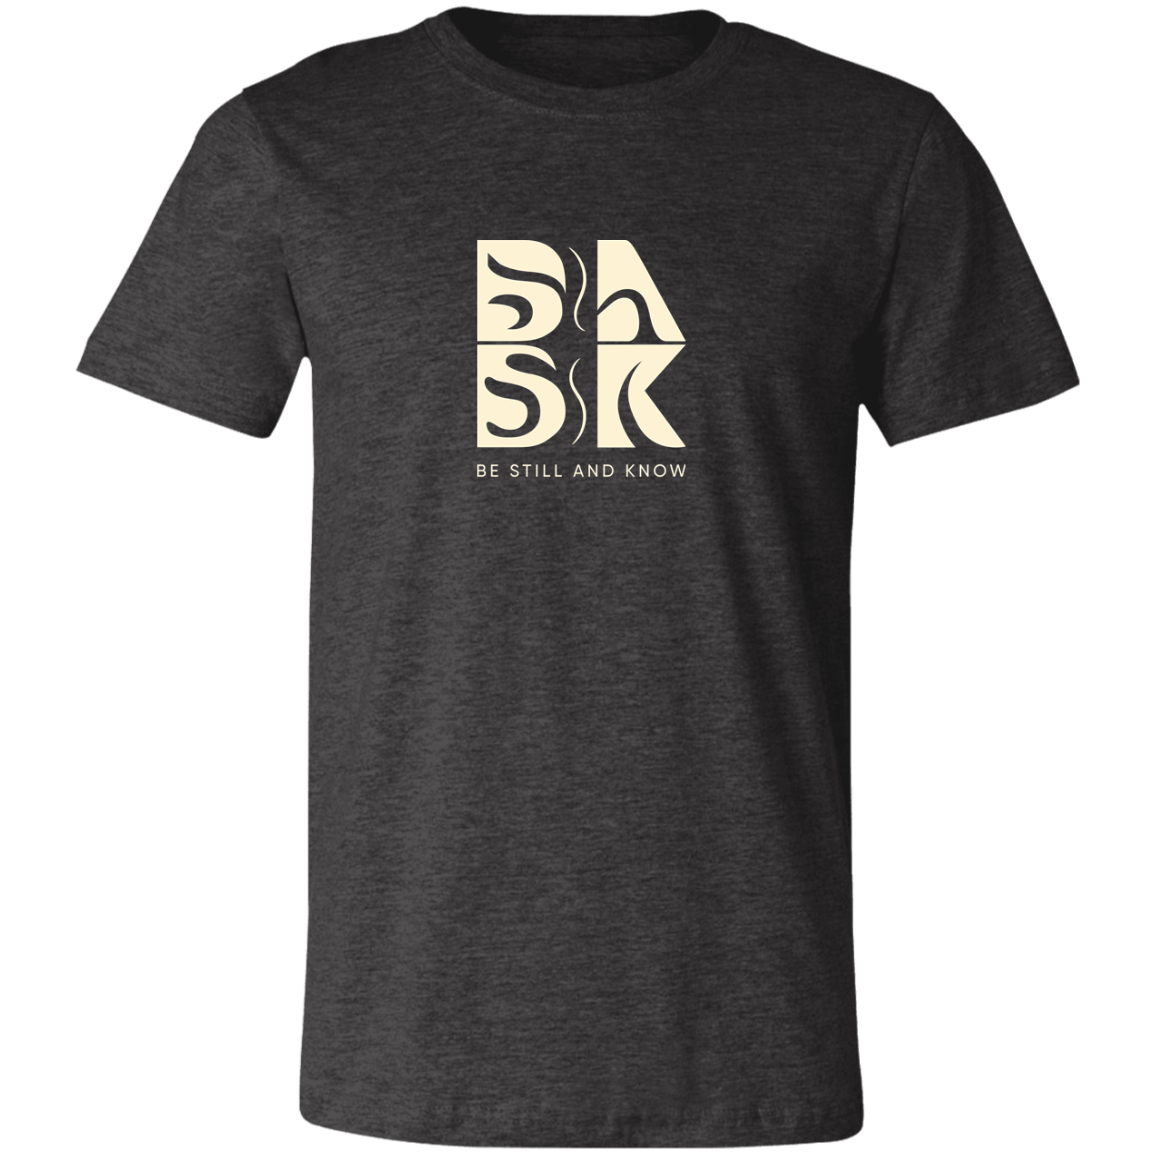 A Blessed Beginnings Tee In Dark Heather Grey with the word "bask" and the BSAK logo, perfect for Christian clothing enthusiasts searching for stylish Christian apparel. Created by Be Still and Know brand.